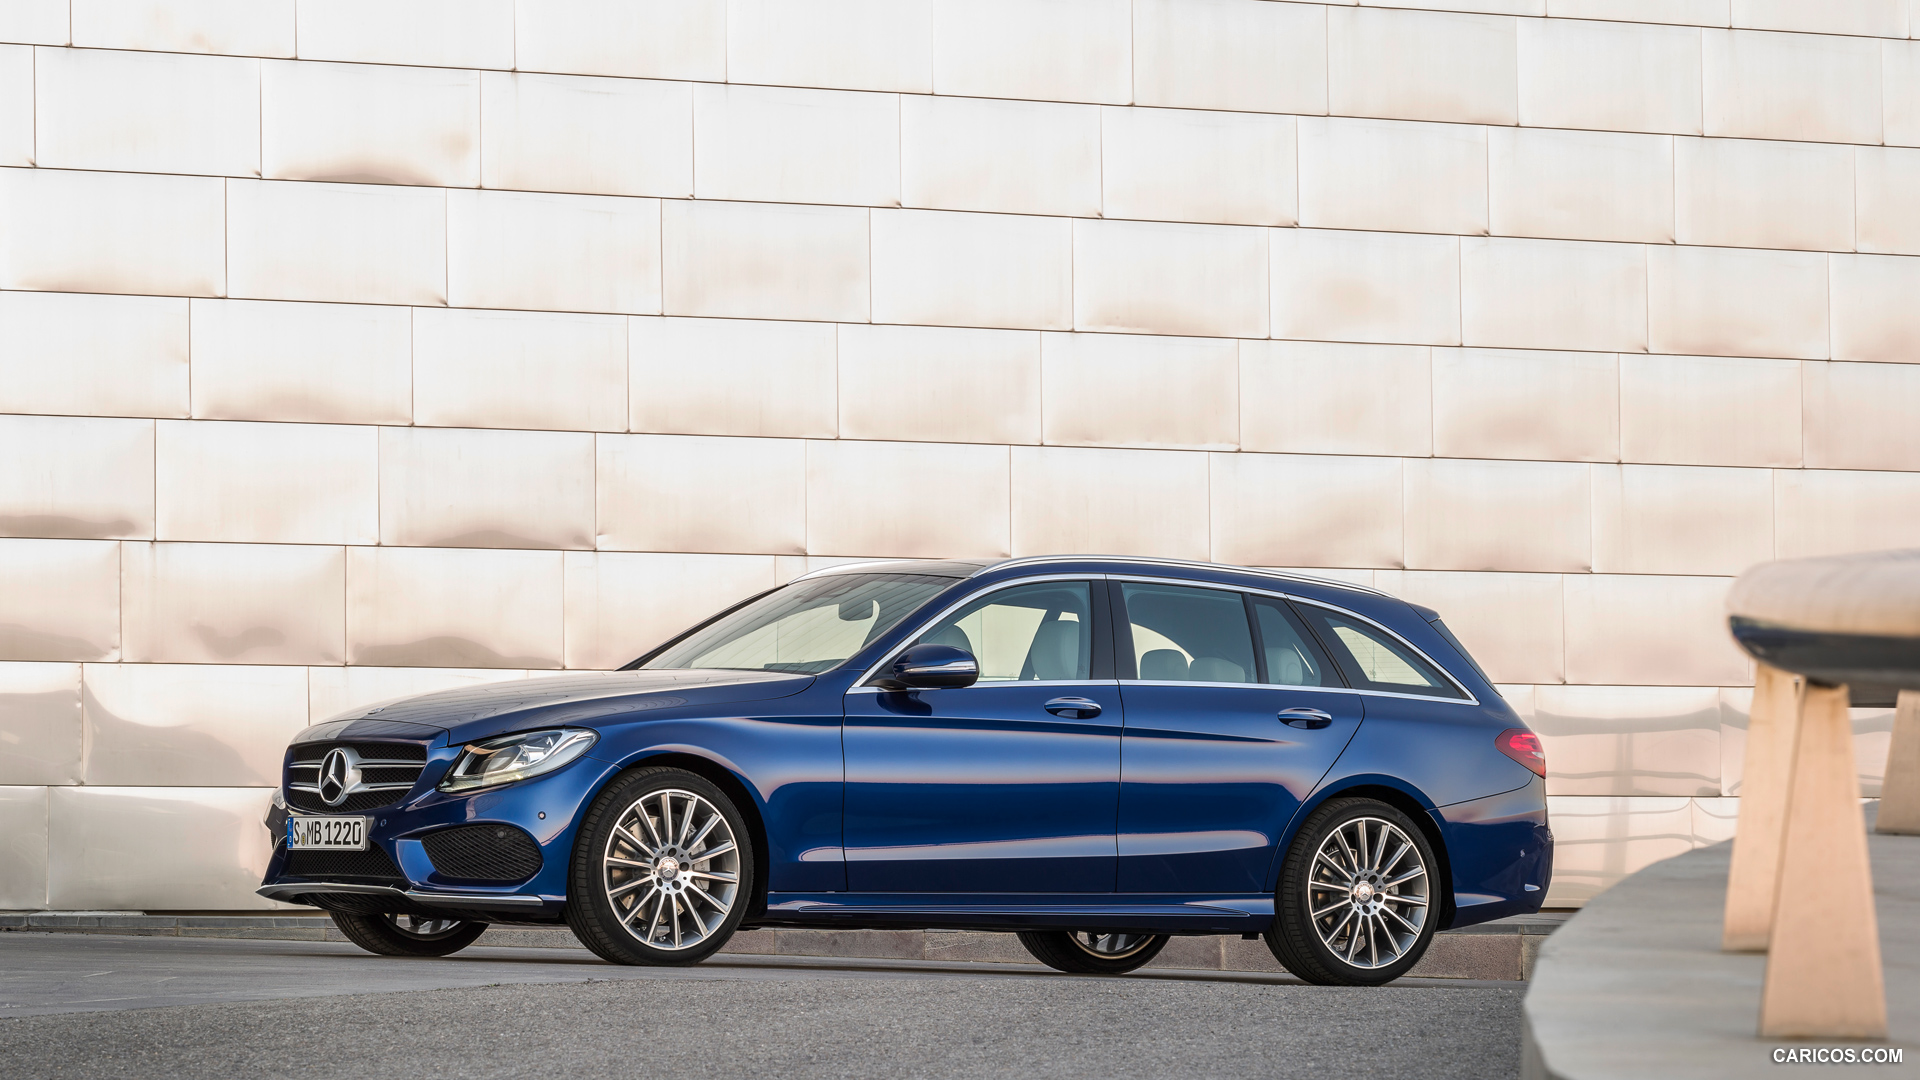 2015 Mercedes-Benz C-Class Estate C250 BlueTEC 4MATIC (AMG sports package) - Side, #65 of 173